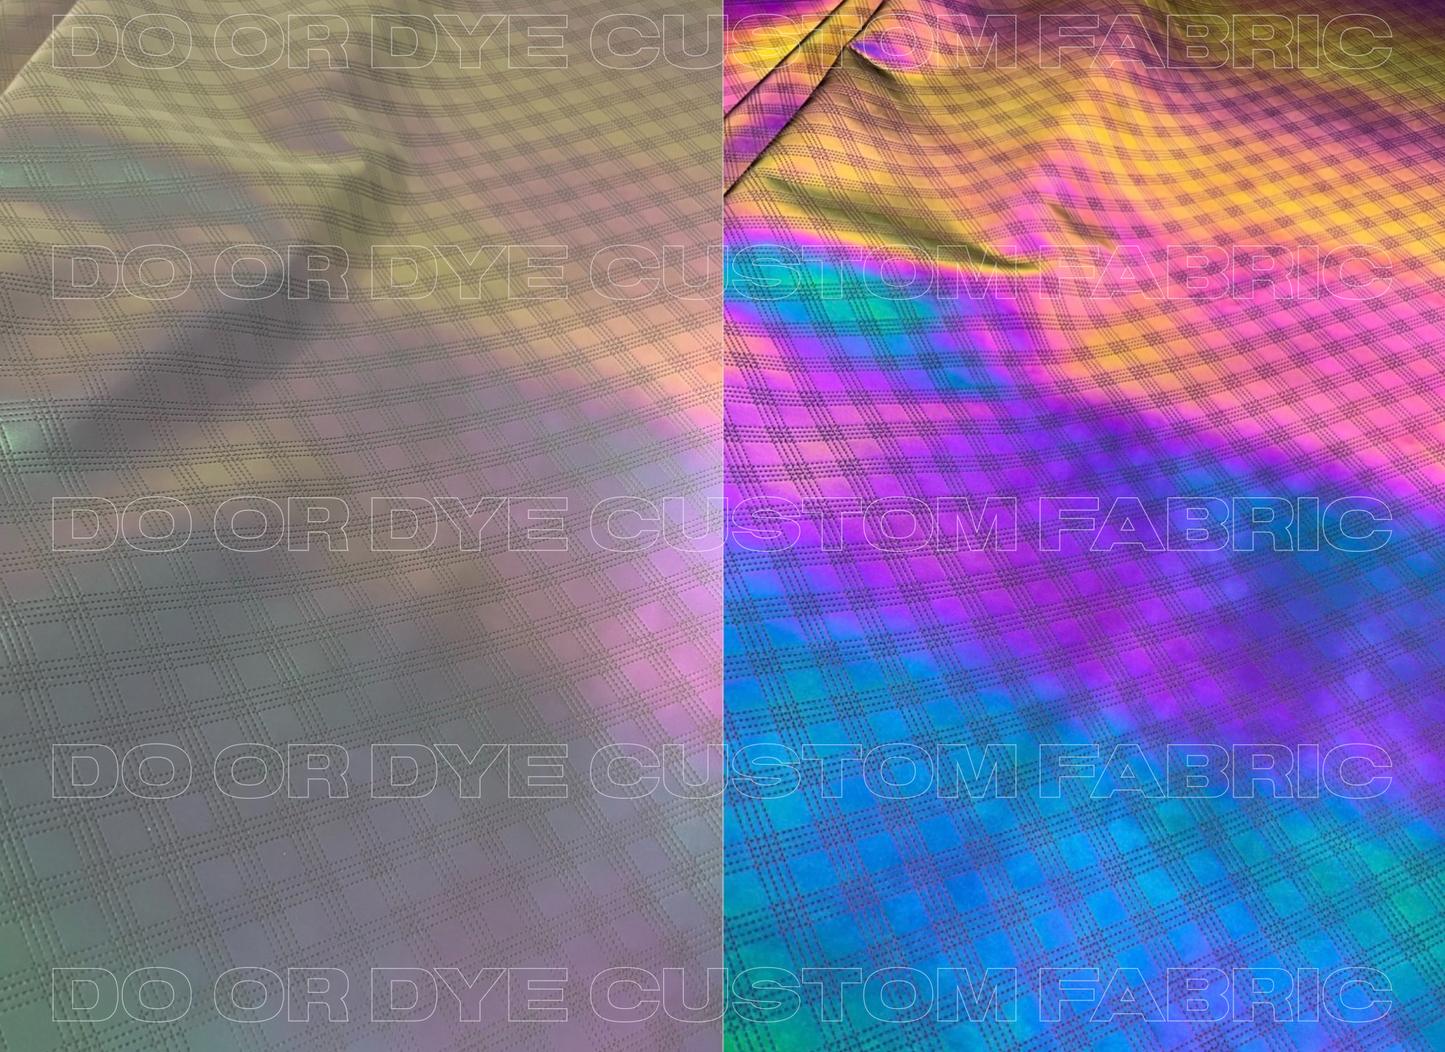 RETAIL Embossed Quilted Light Reflective .7mm Pliable Soft Back VINYL